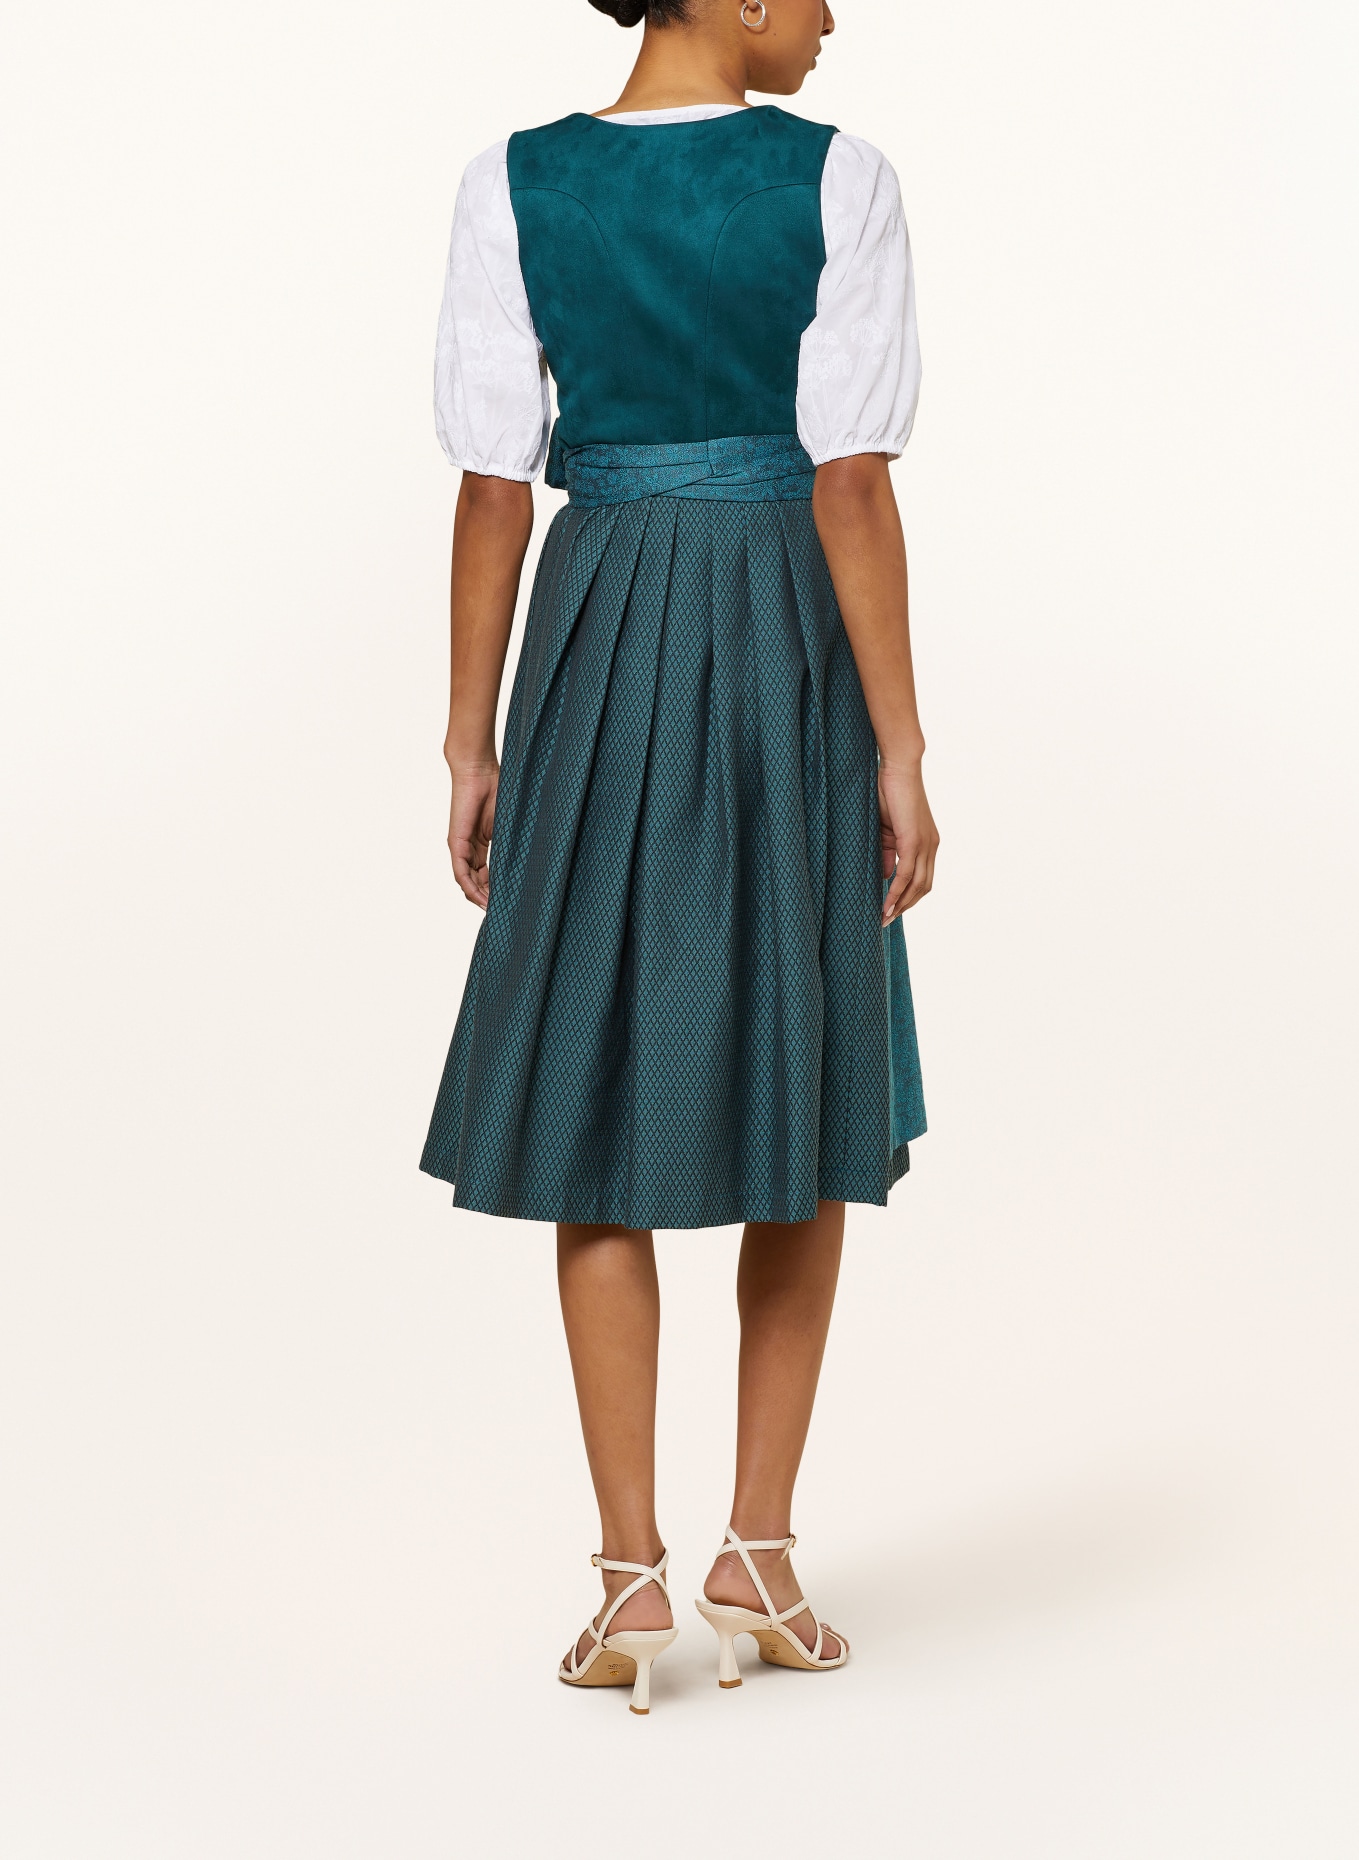 LIMBERRY Dirndl, Color: TEAL/ TURQUOISE/ DARK GRAY (Image 3)